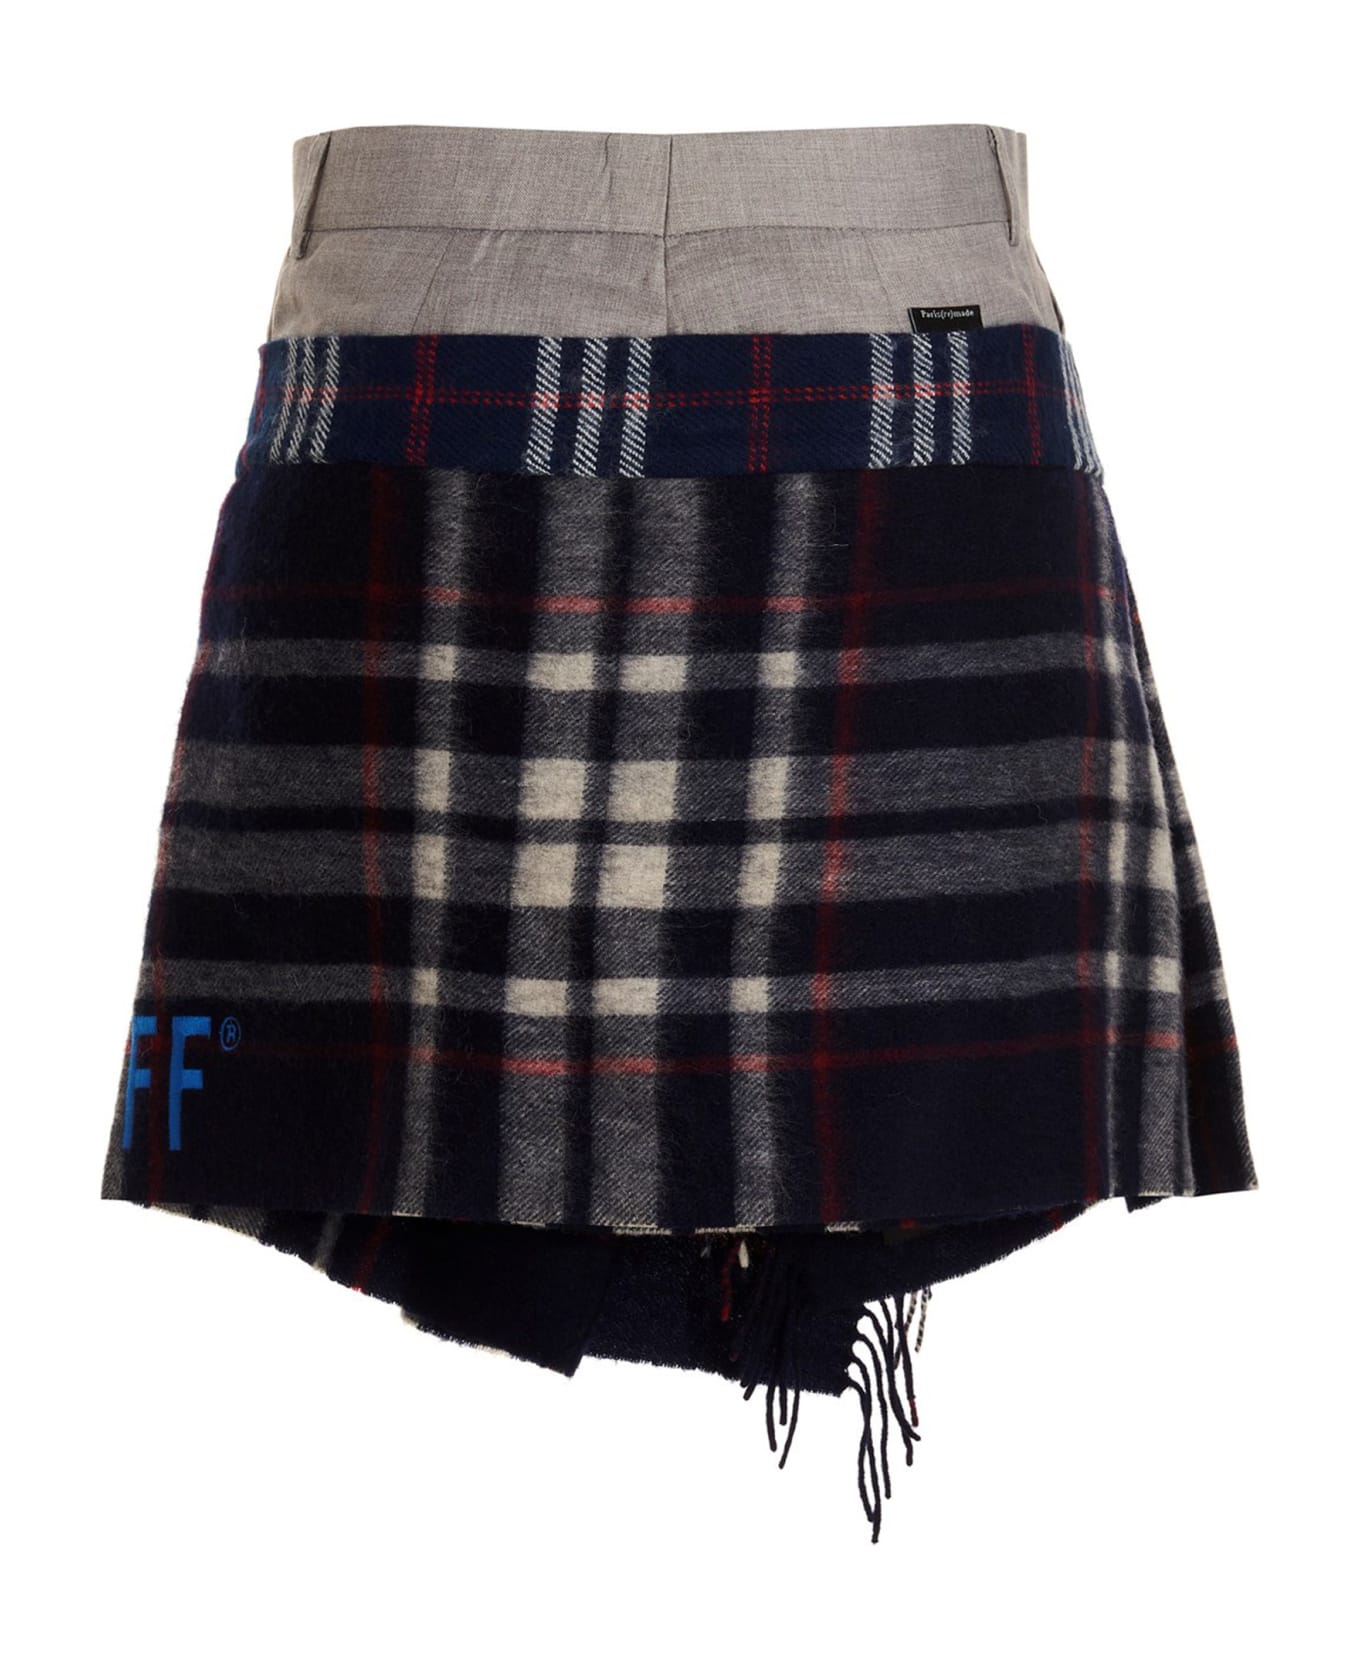 1/OFF 'check Scarf Reworked' Skirt - Multicolor